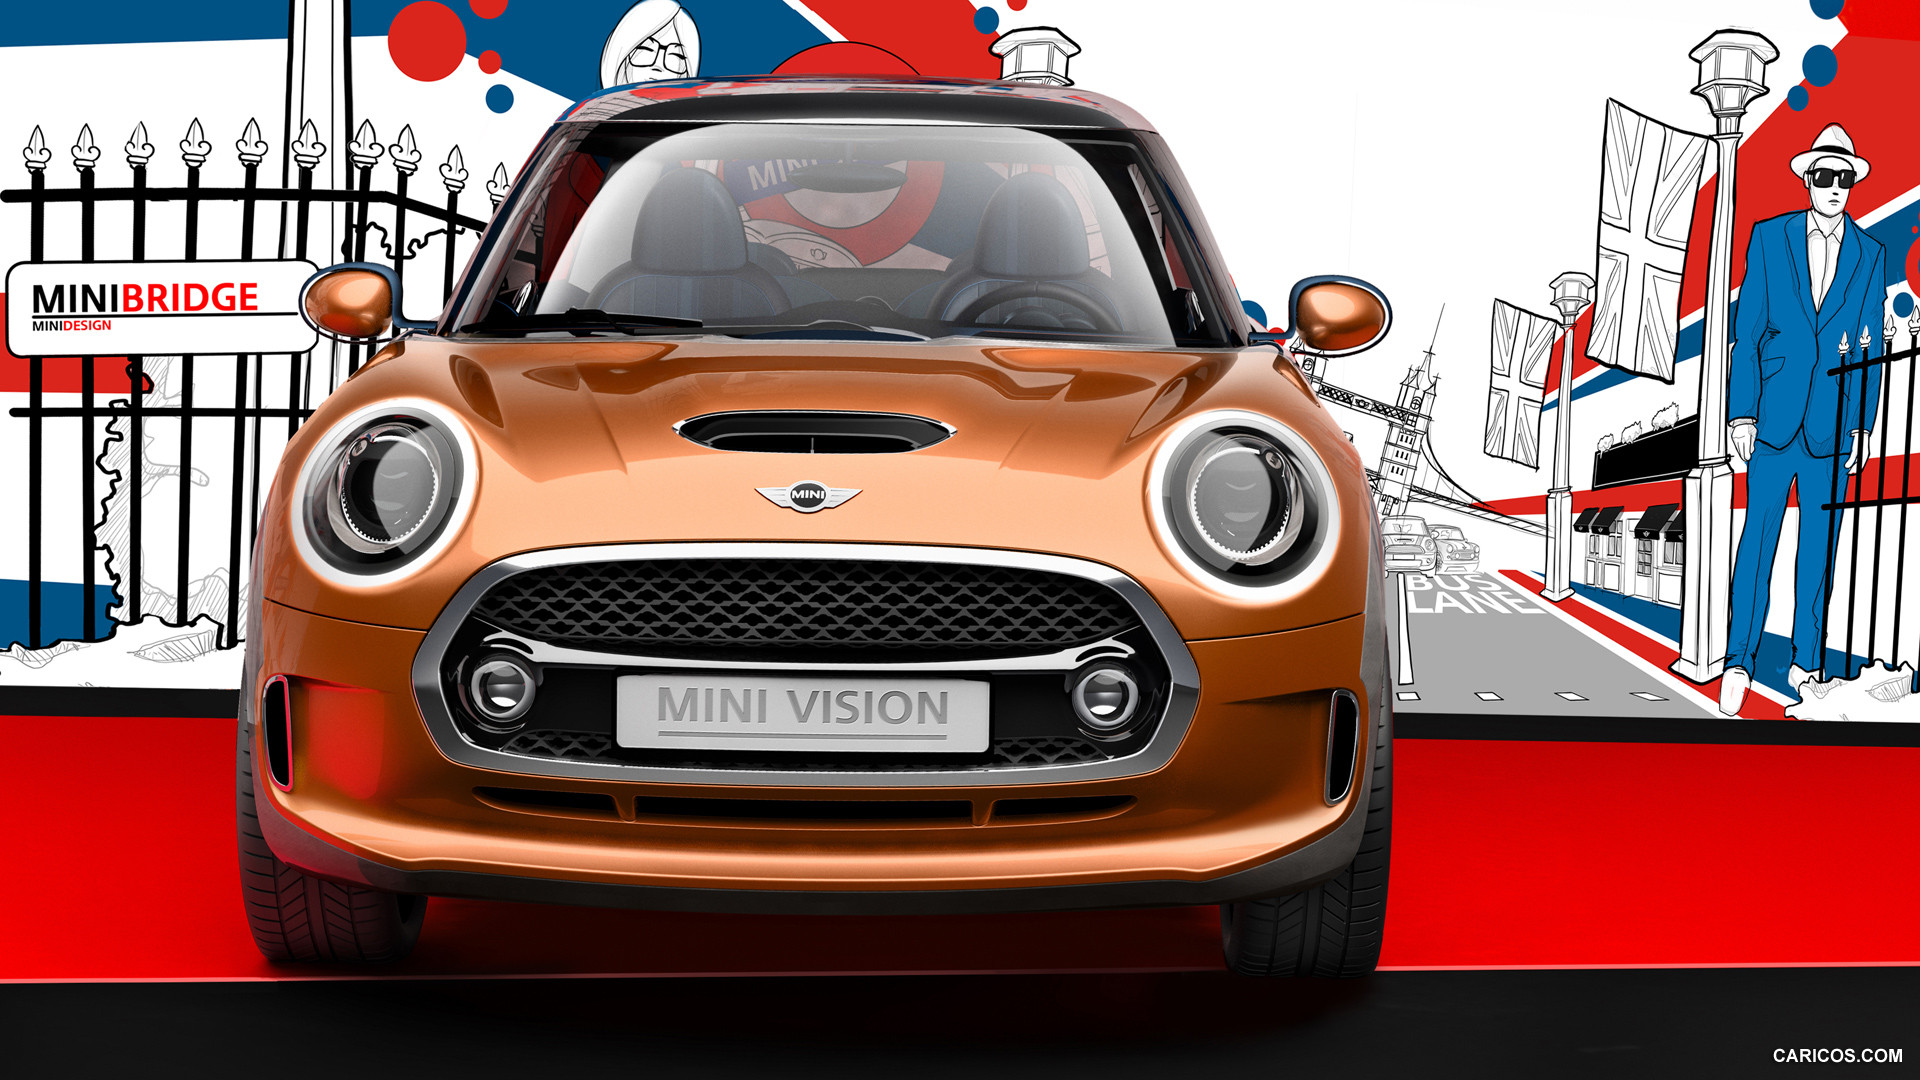 2013 MINI Vision Concept  - Front, #7 of 8